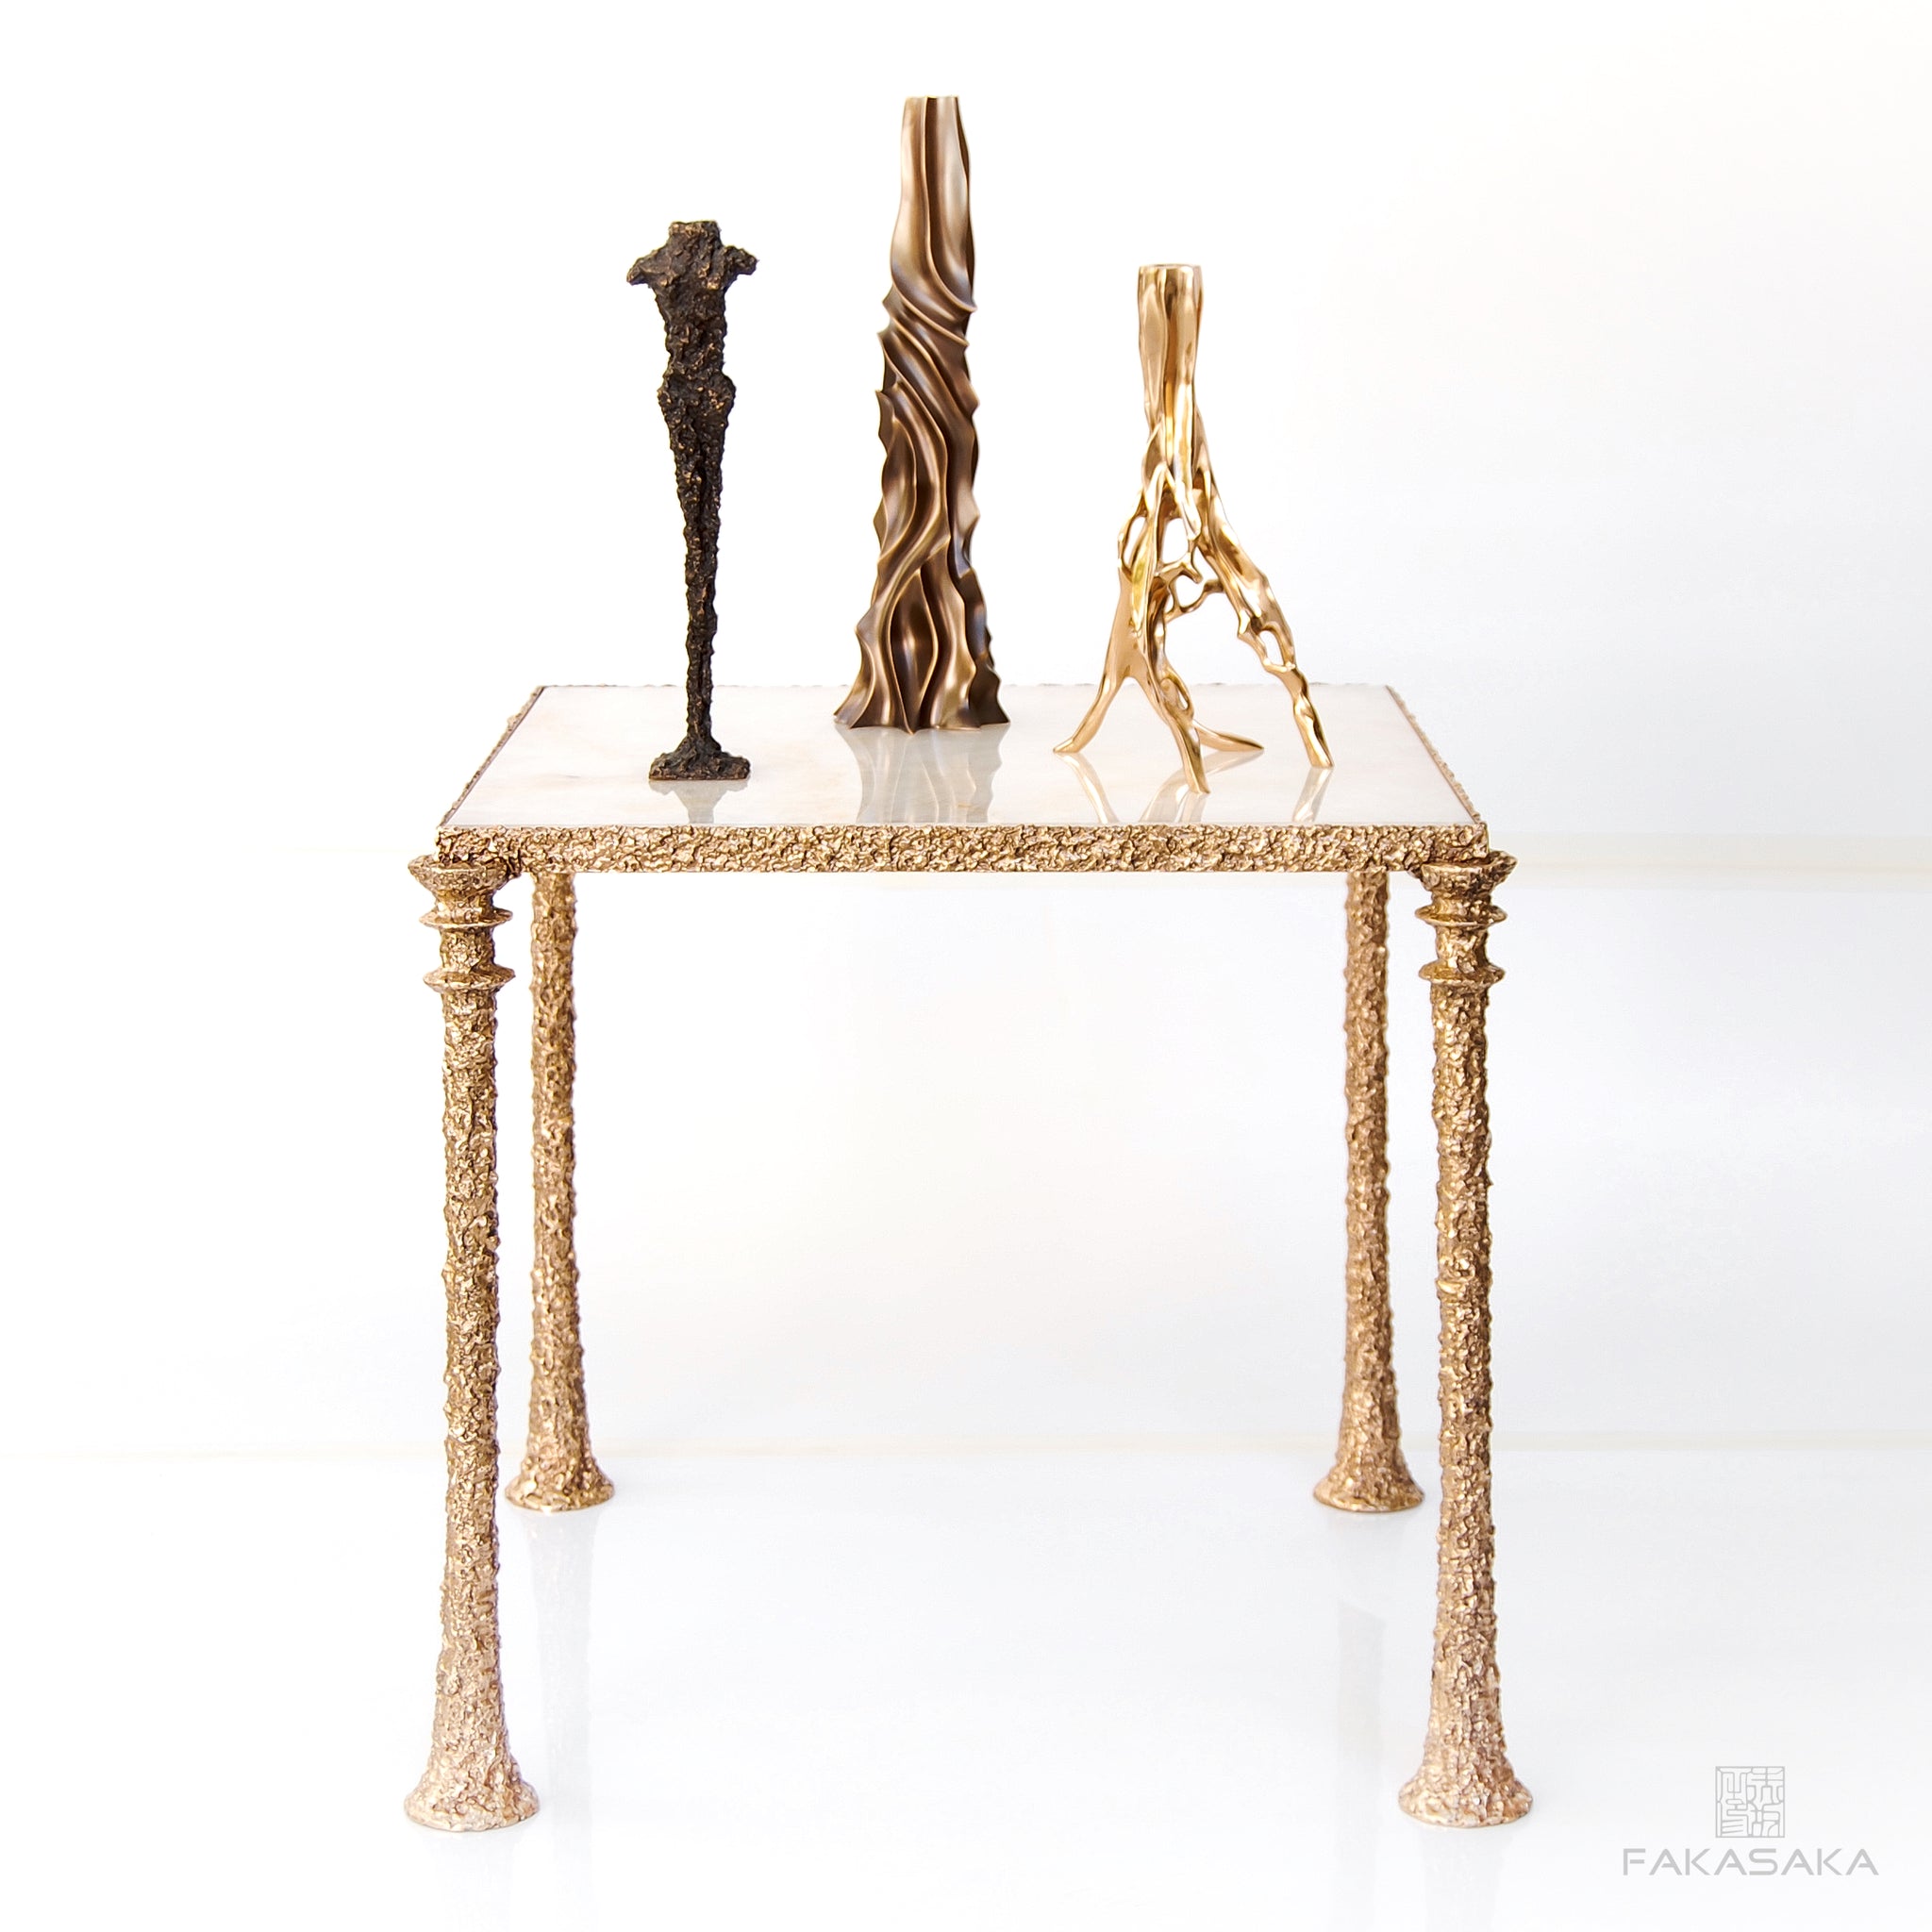 GUILL SIDE TABLE<br><br>TRANSLUCENT ONYX<br>POLISHED BRONZE